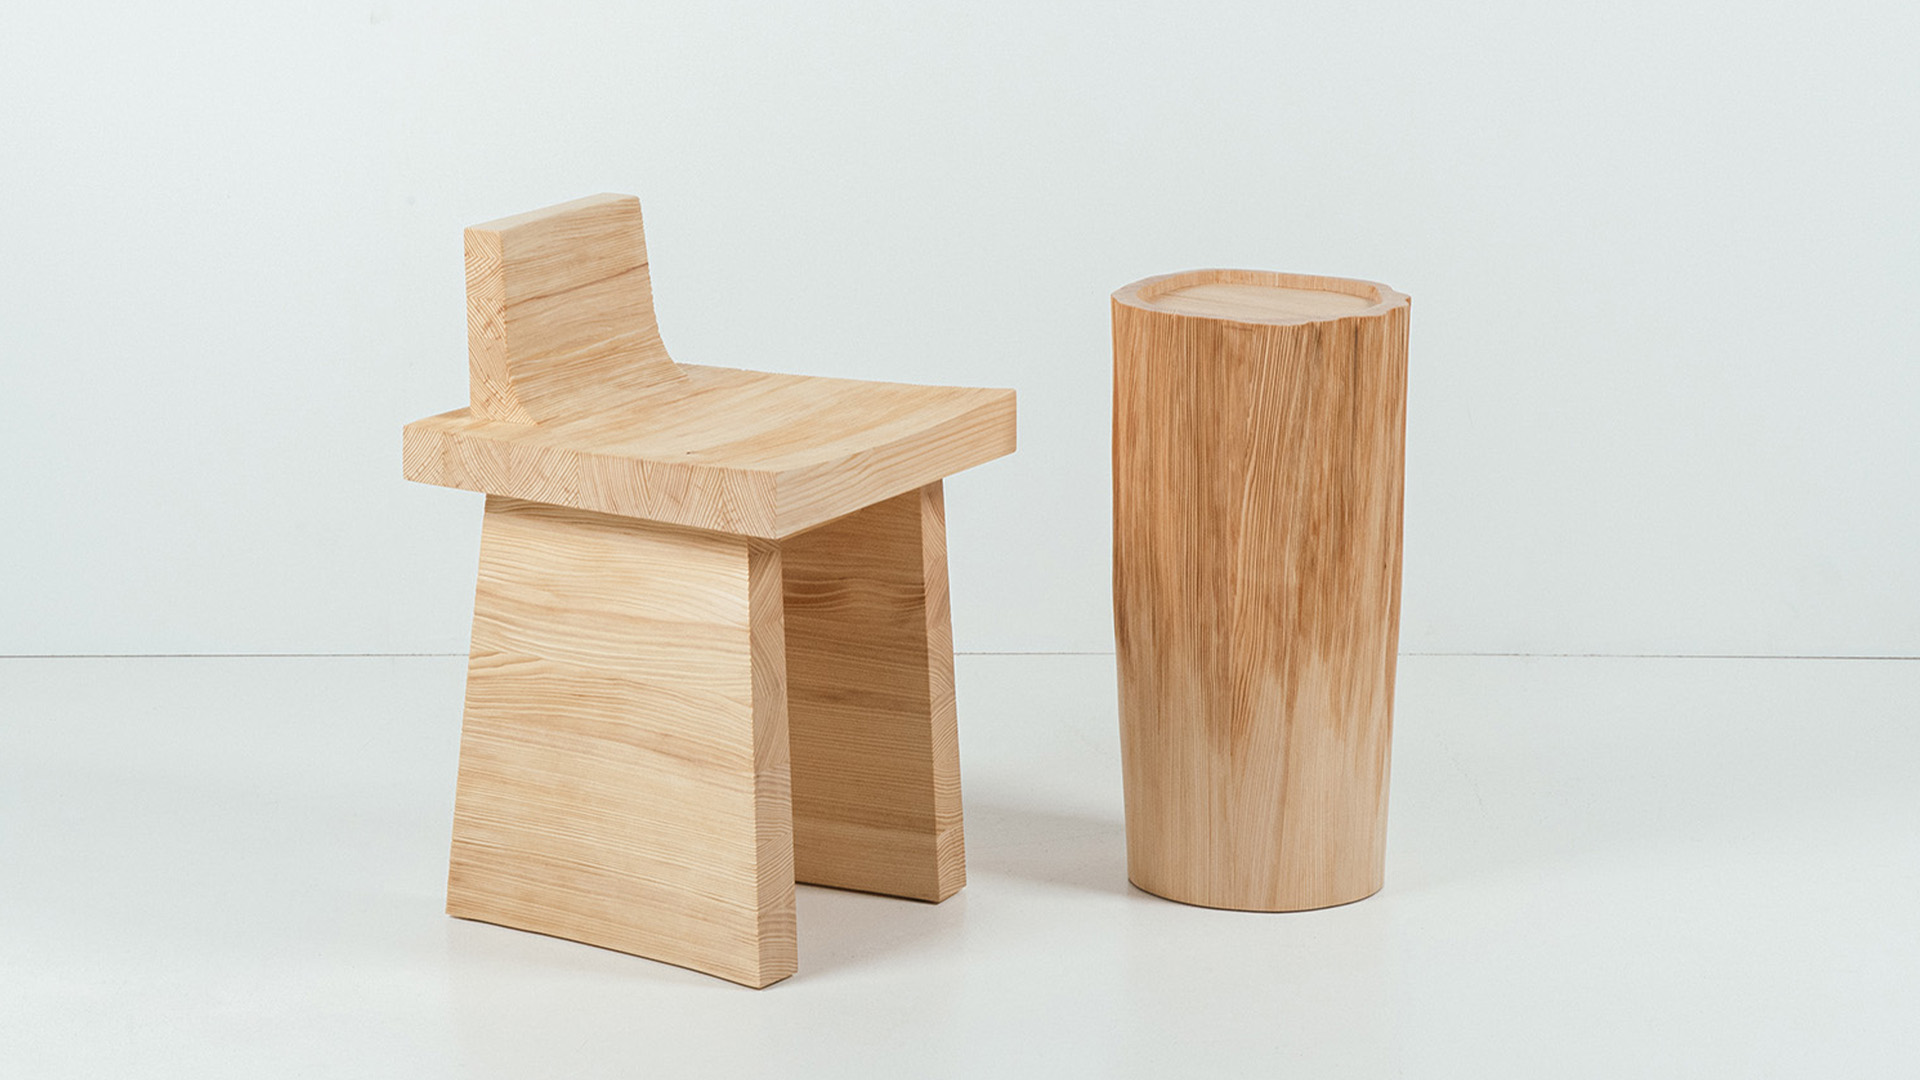 Loewe's exhibition for Milan Design Week puts the spotlight on the simple  chair - identity